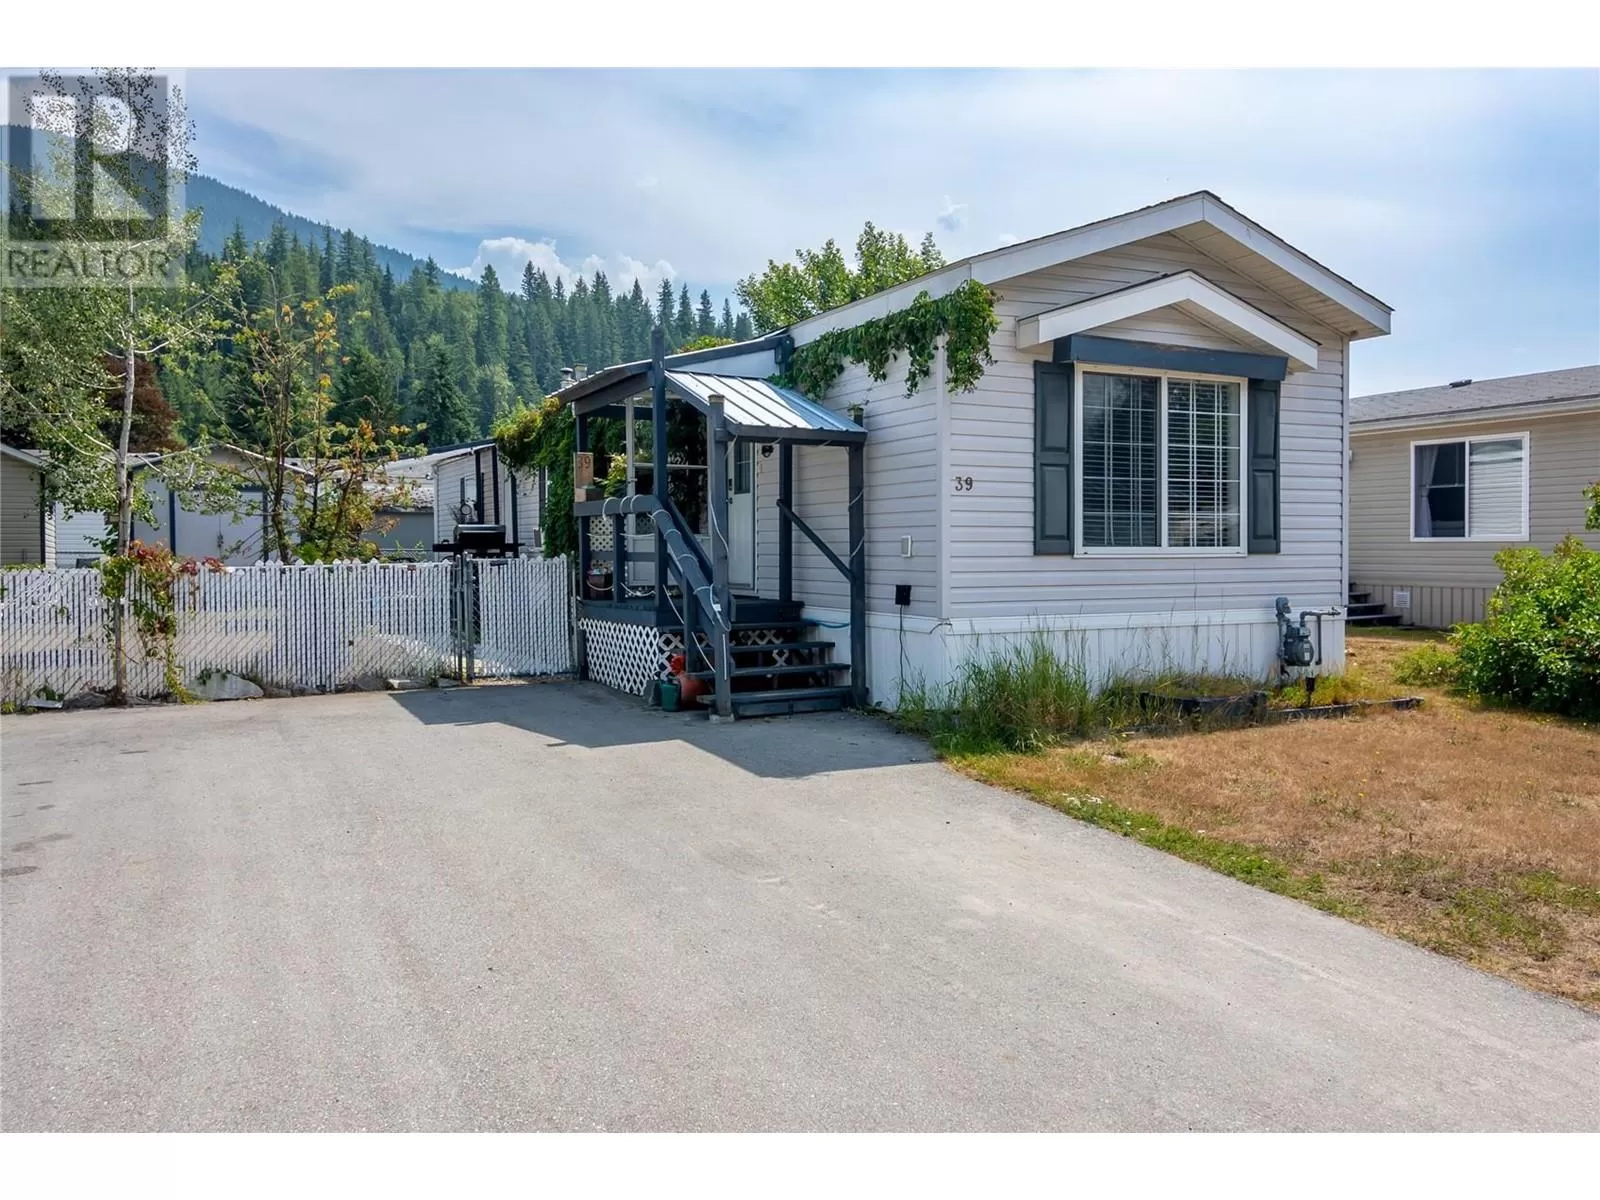 Manufactured Home for rent: 241 23 Highway N Unit# 39, Revelstoke, British Columbia V0E 2S0